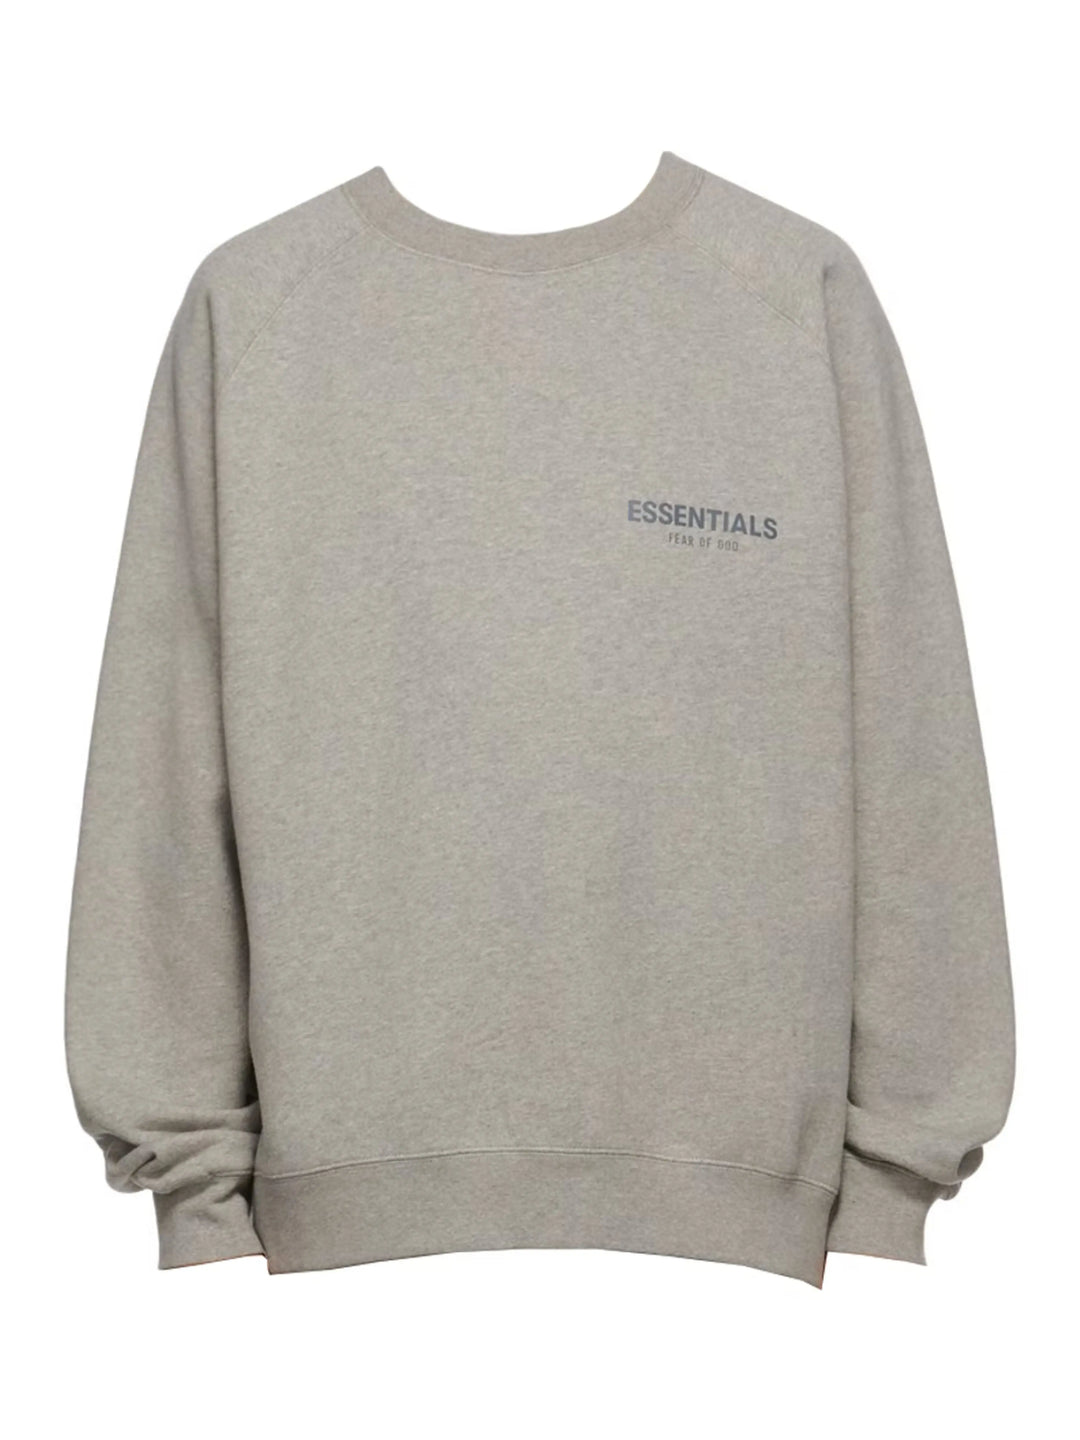 Fear Of God Essentials Core Collection Crewneck Dark Heather Oatmeal [FW21] Prior